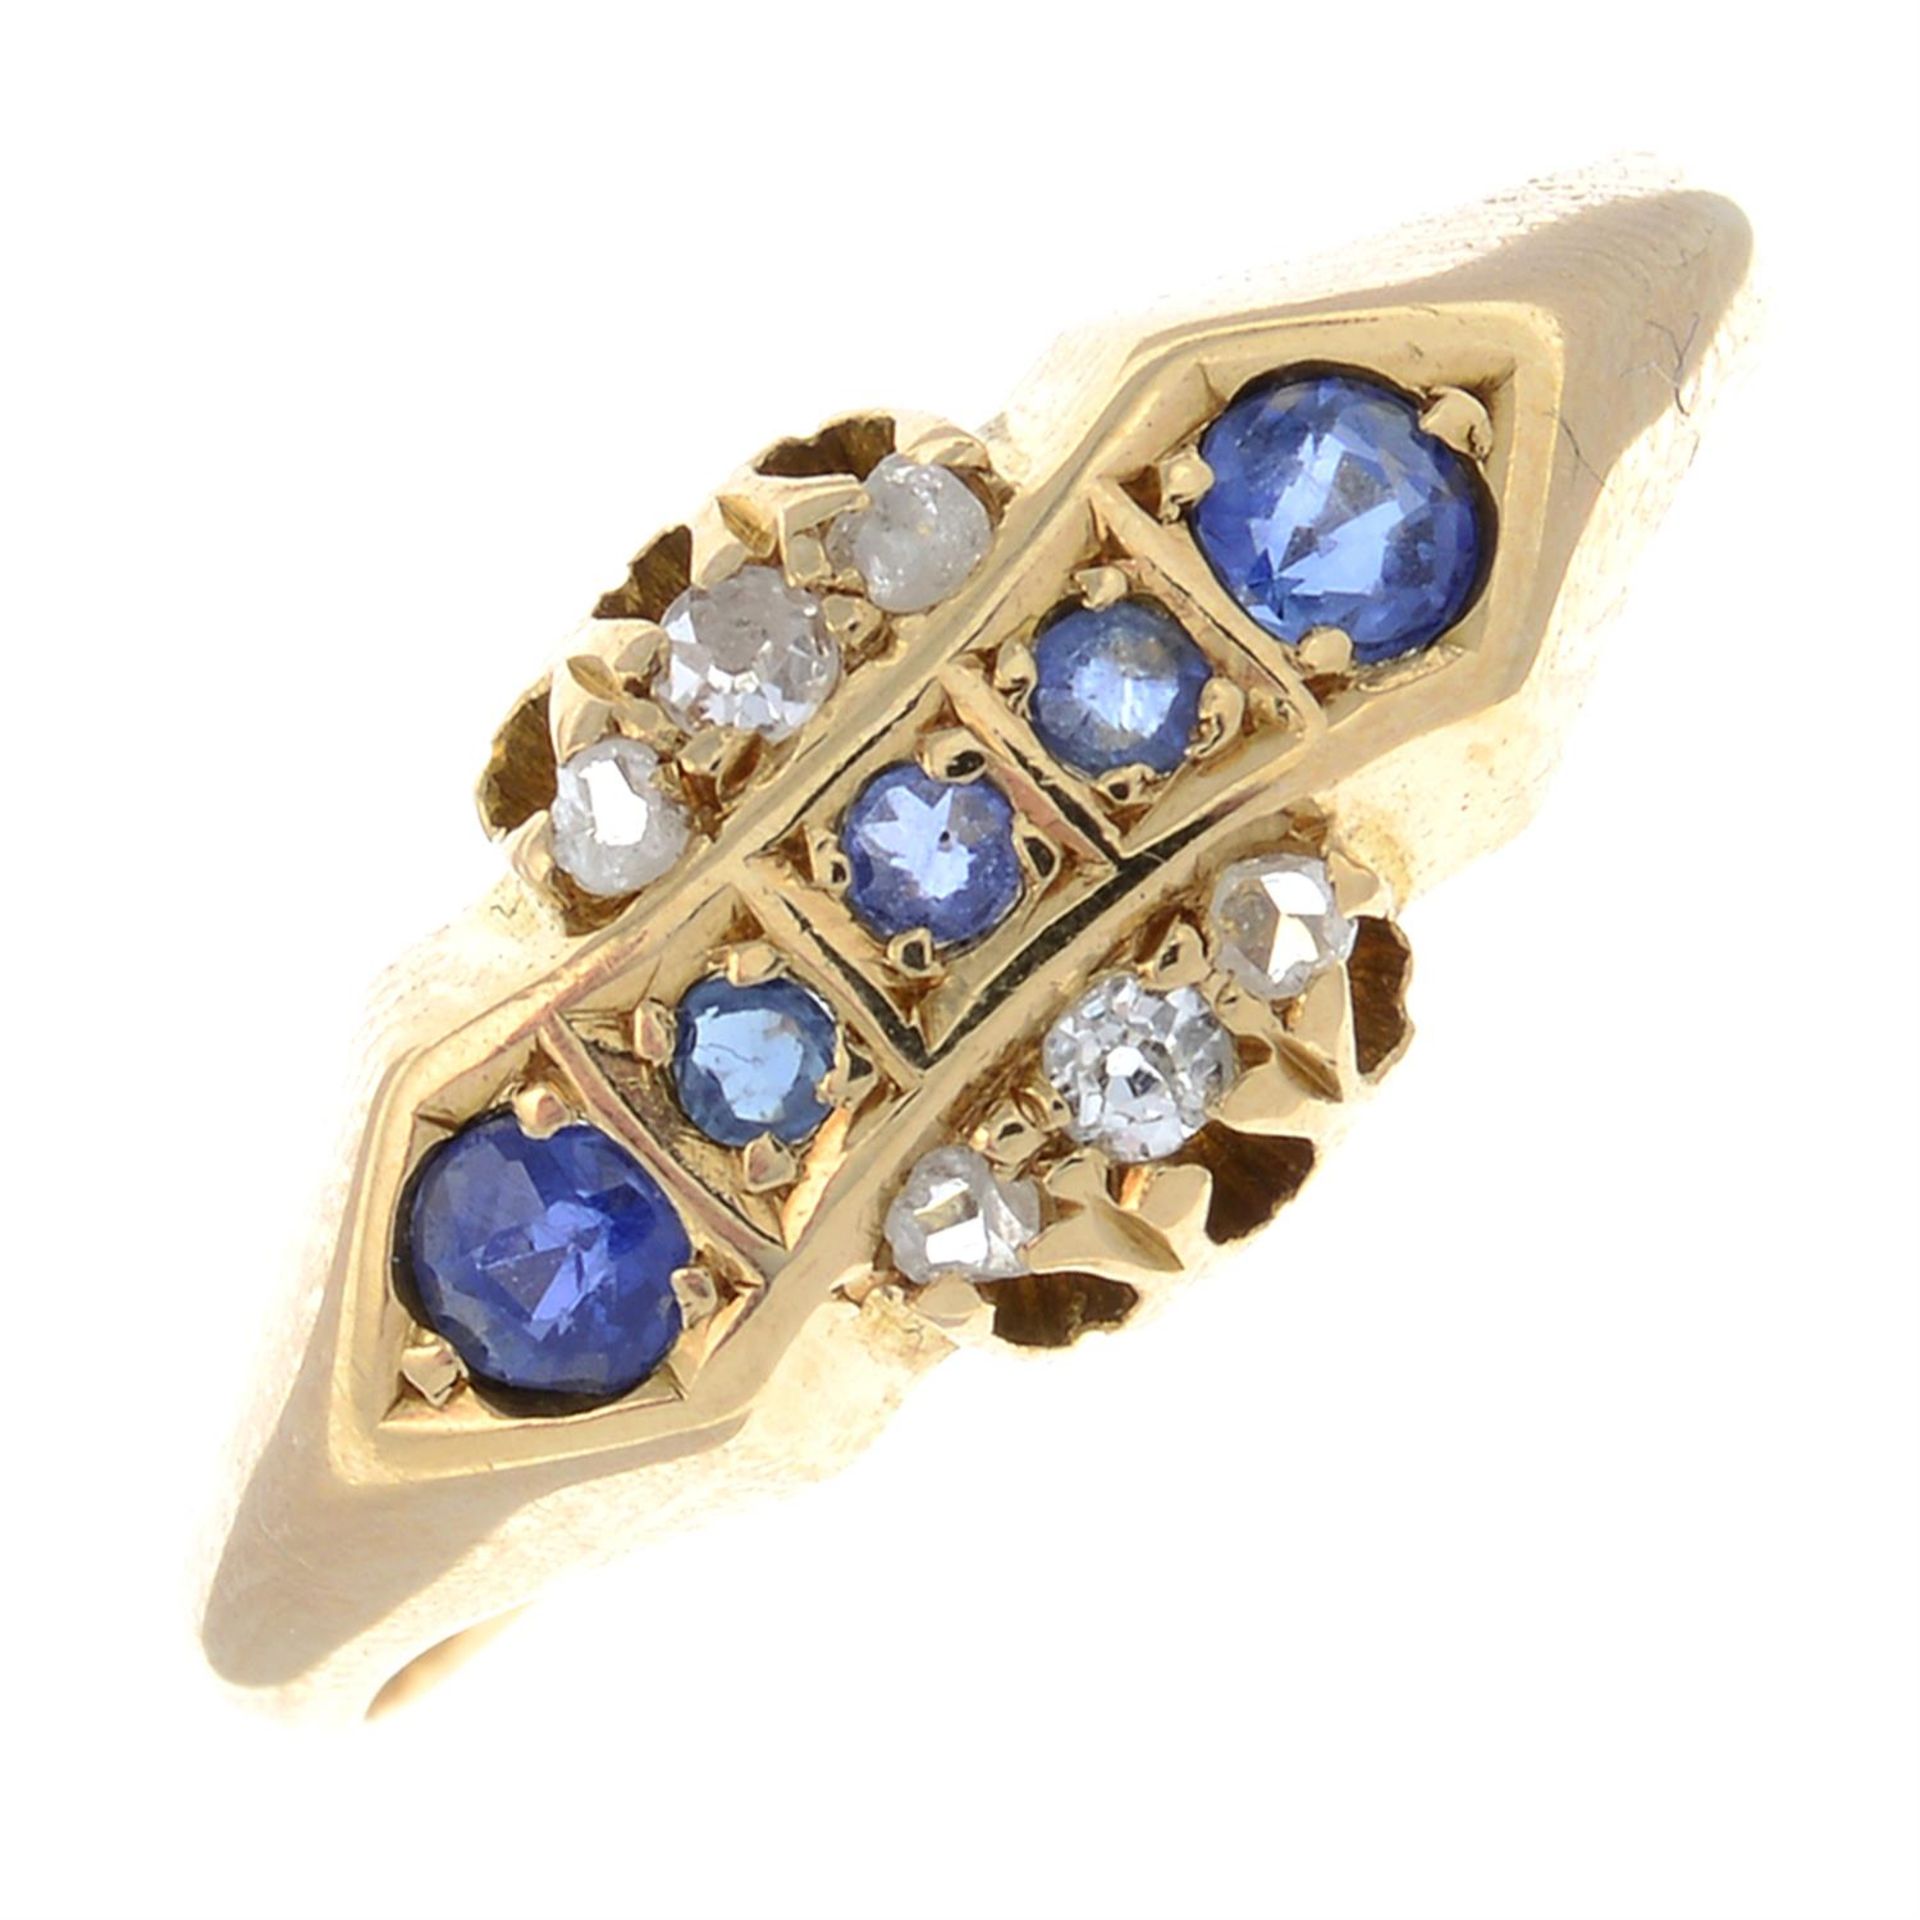 An early 20th century sapphire and old-cut diamond ring.